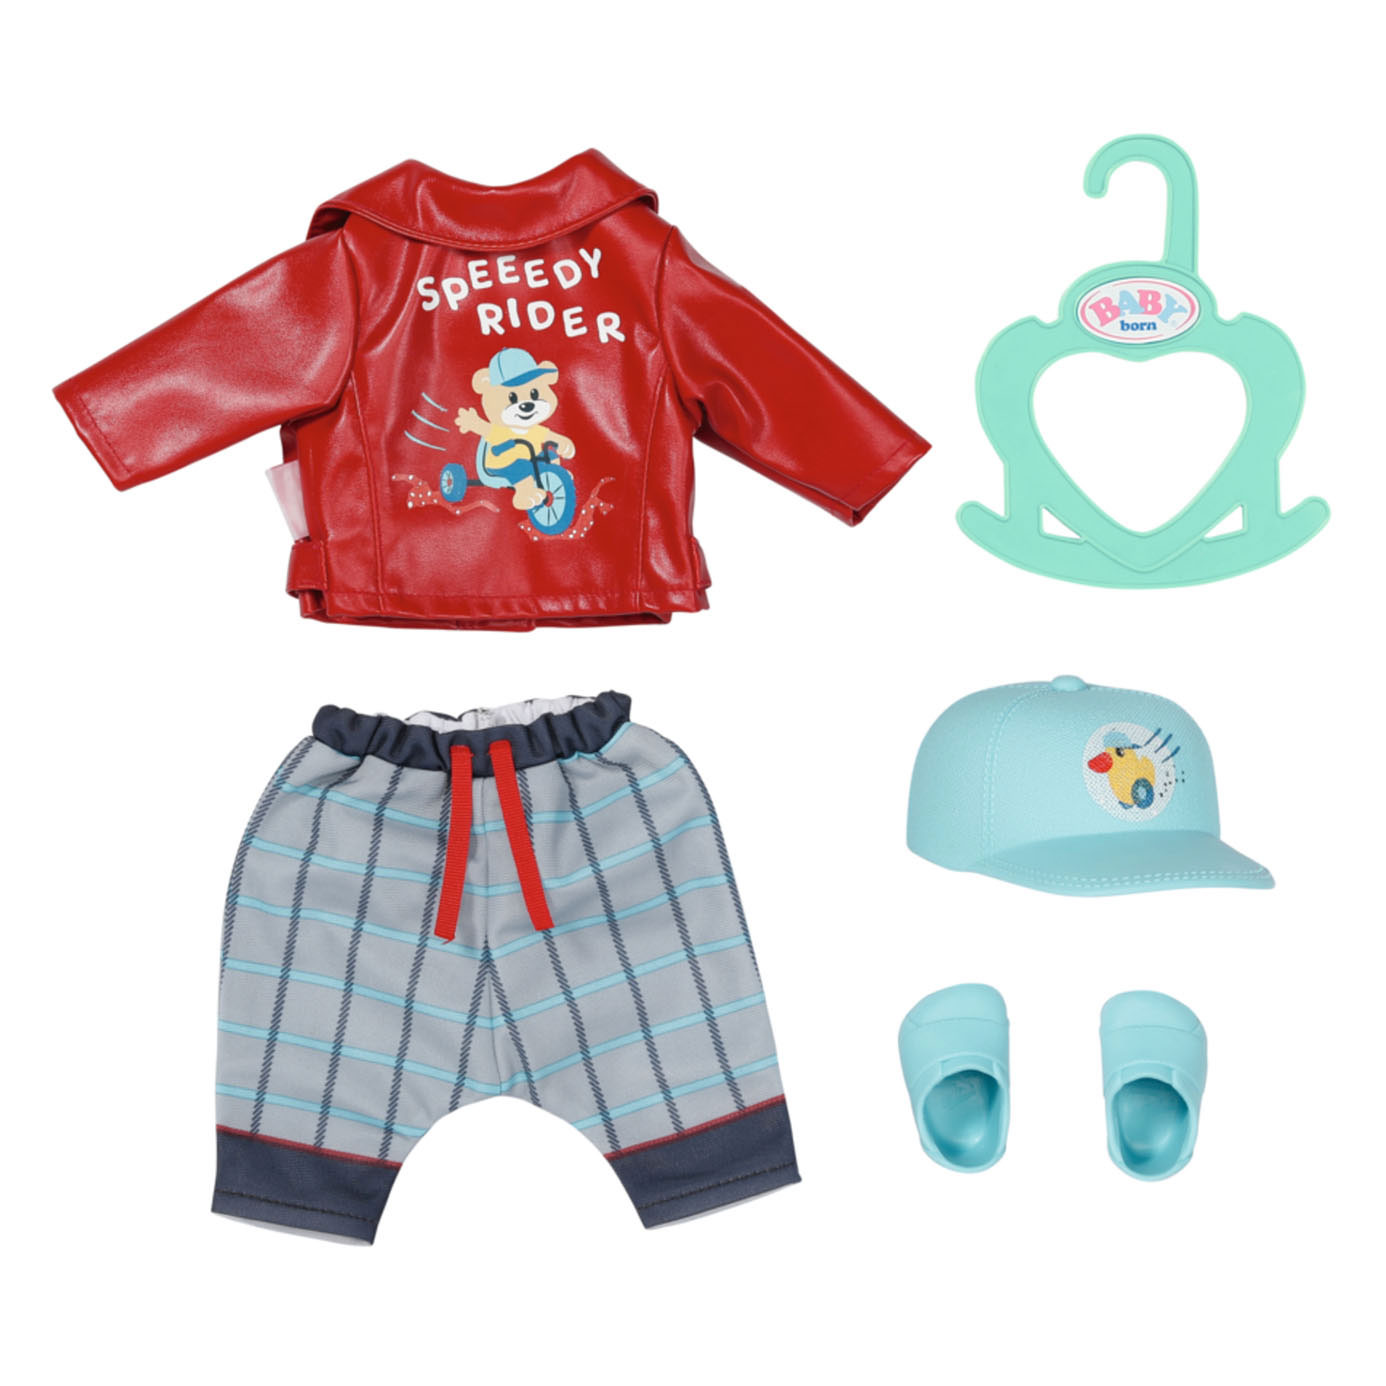 BABY born Little Cool Kids-outfit, 36cm